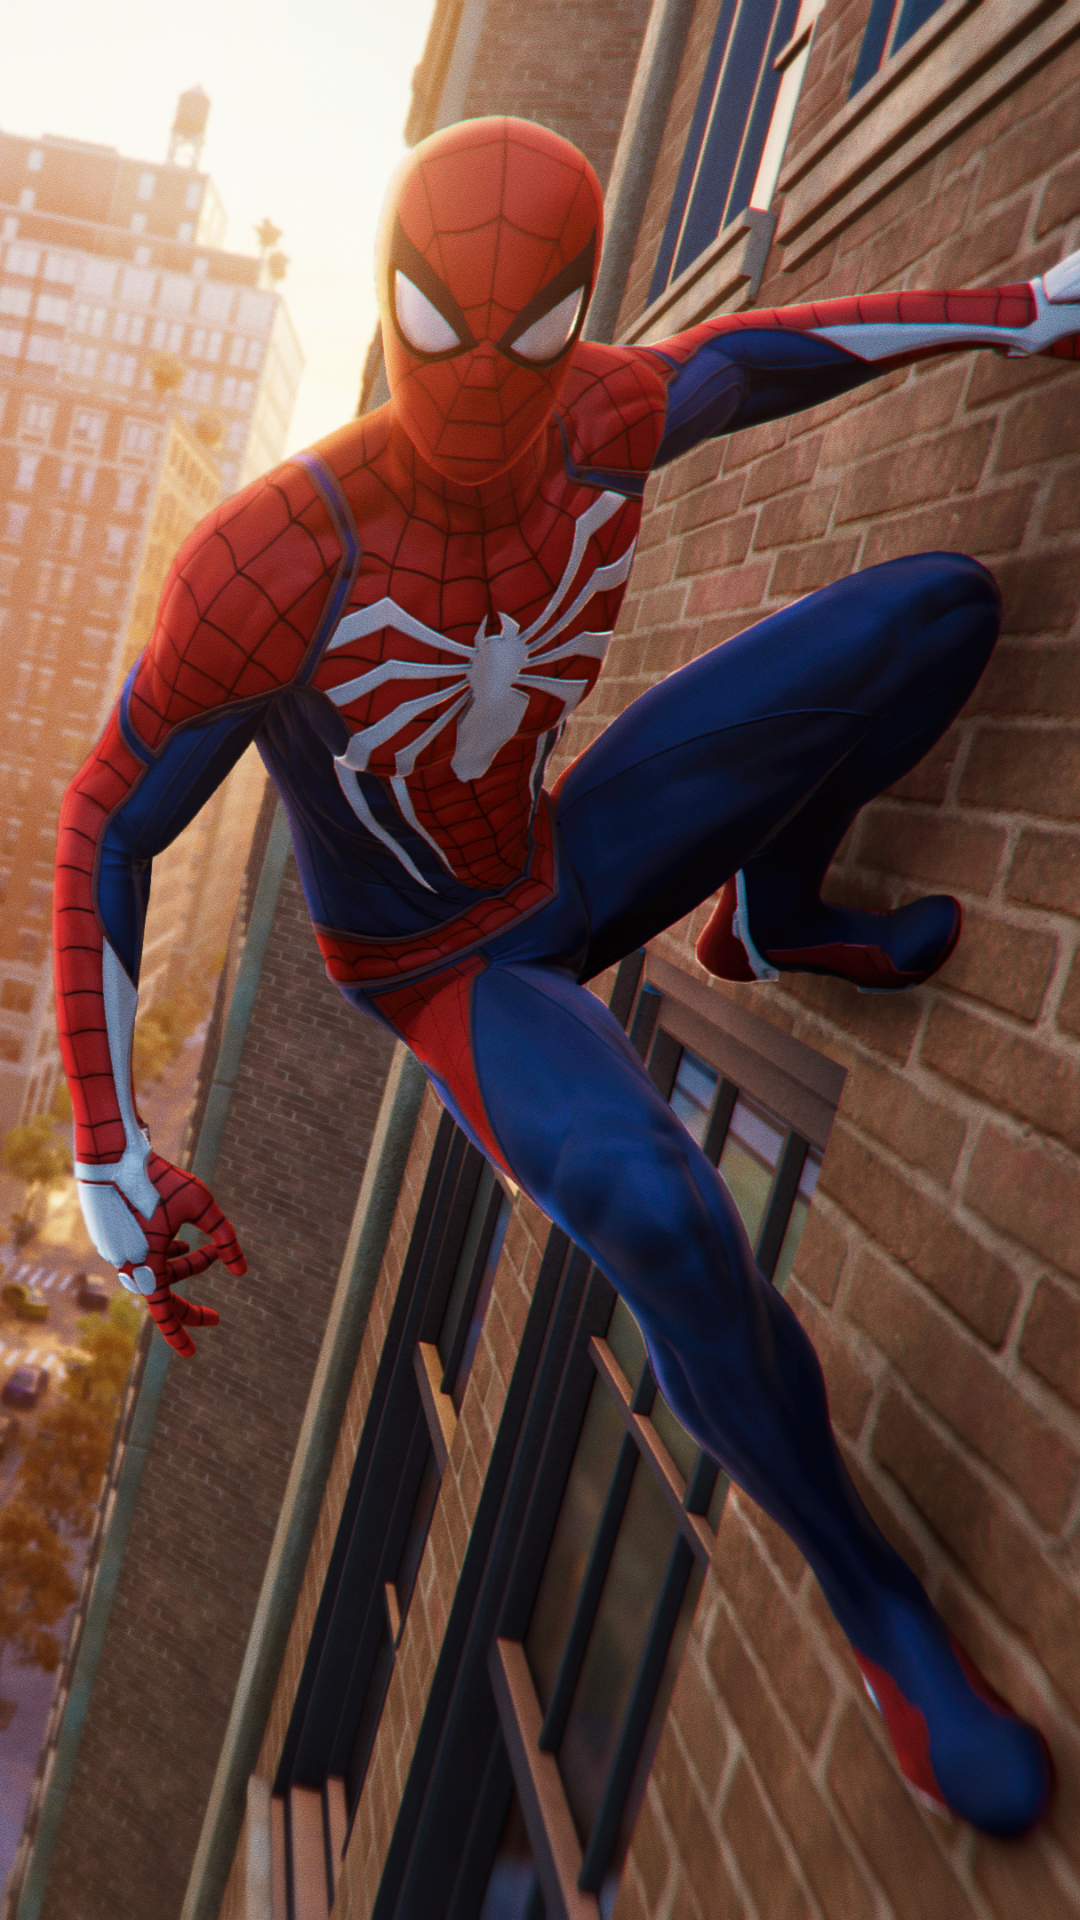 Spider Man Ps4 Phone Wallpapers